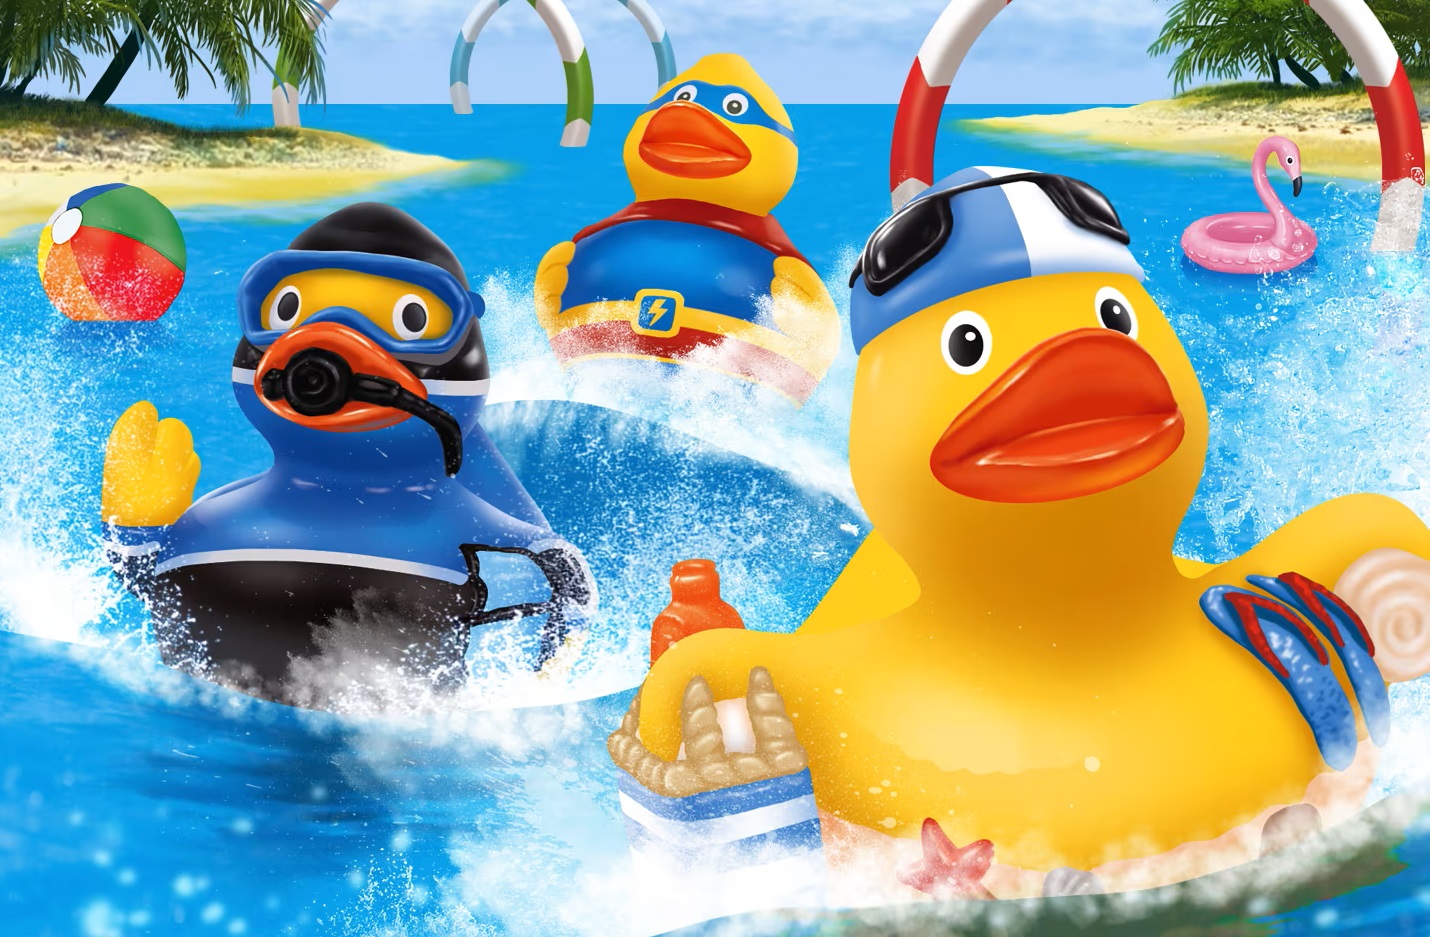 Duck Race for Nintendo Switch - Nintendo Official Site